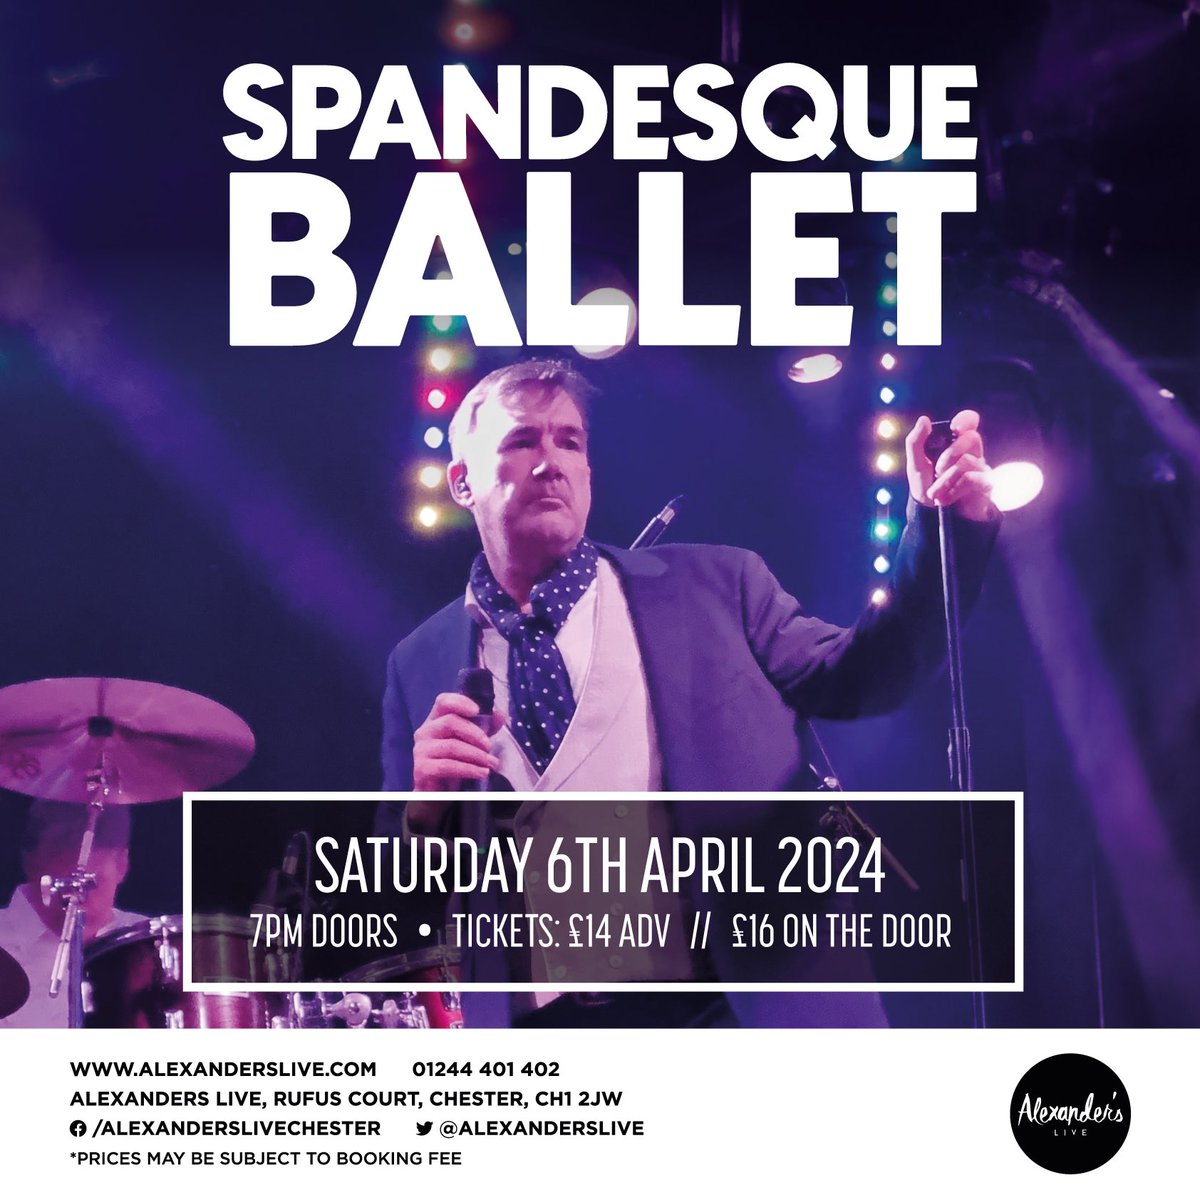 Final call for tickets to the best #spandauballet tribute around. Get your tickets for SPANDESQUE BALLET NOW 🕺💃🏼 alexanderslive.seetickets.com/event/spandesq… @ShitChester @chestertweetsuk @SkintChester @chesterdotcom @welovegoodtimes @CH_Northgate @VisitCheshire @VisitChester_ @standardchester